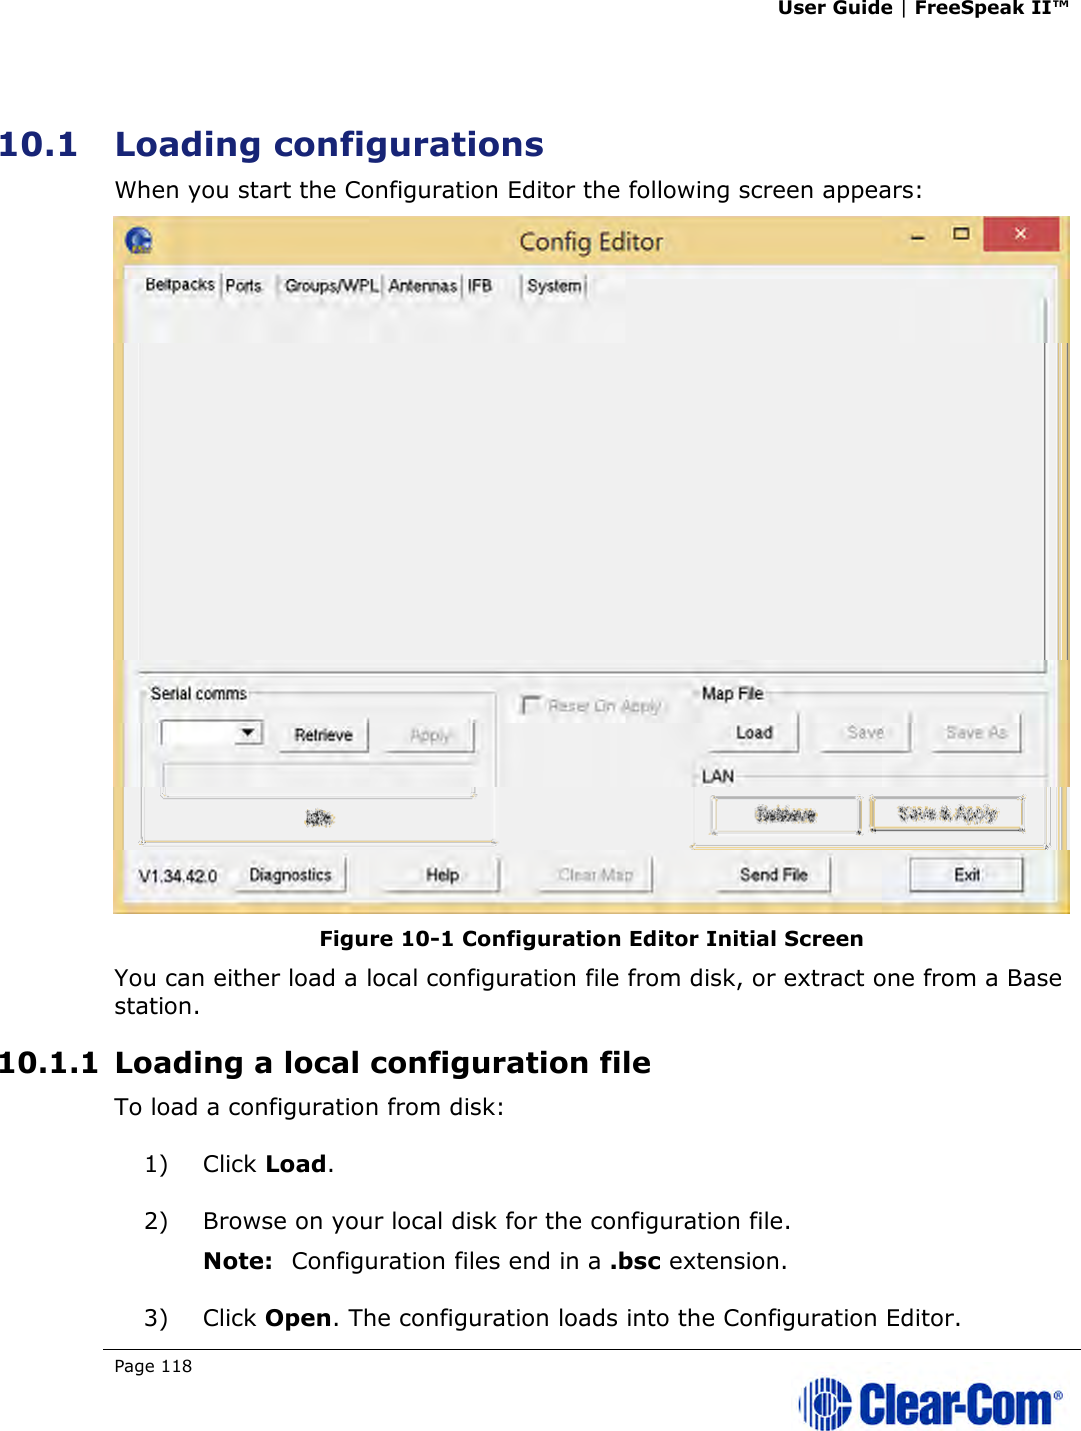 User Guide | FreeSpeak II™  Page 118    10.1 Loading configurations  When you start the Configuration Editor the following screen appears:  Figure 10-1 Configuration Editor Initial Screen You can either load a local configuration file from disk, or extract one from a Base station. 10.1.1 Loading a local configuration file To load a configuration from disk: 1) Click Load. 2) Browse on your local disk for the configuration file.  Note: Configuration files end in a .bsc extension. 3) Click Open. The configuration loads into the Configuration Editor. 